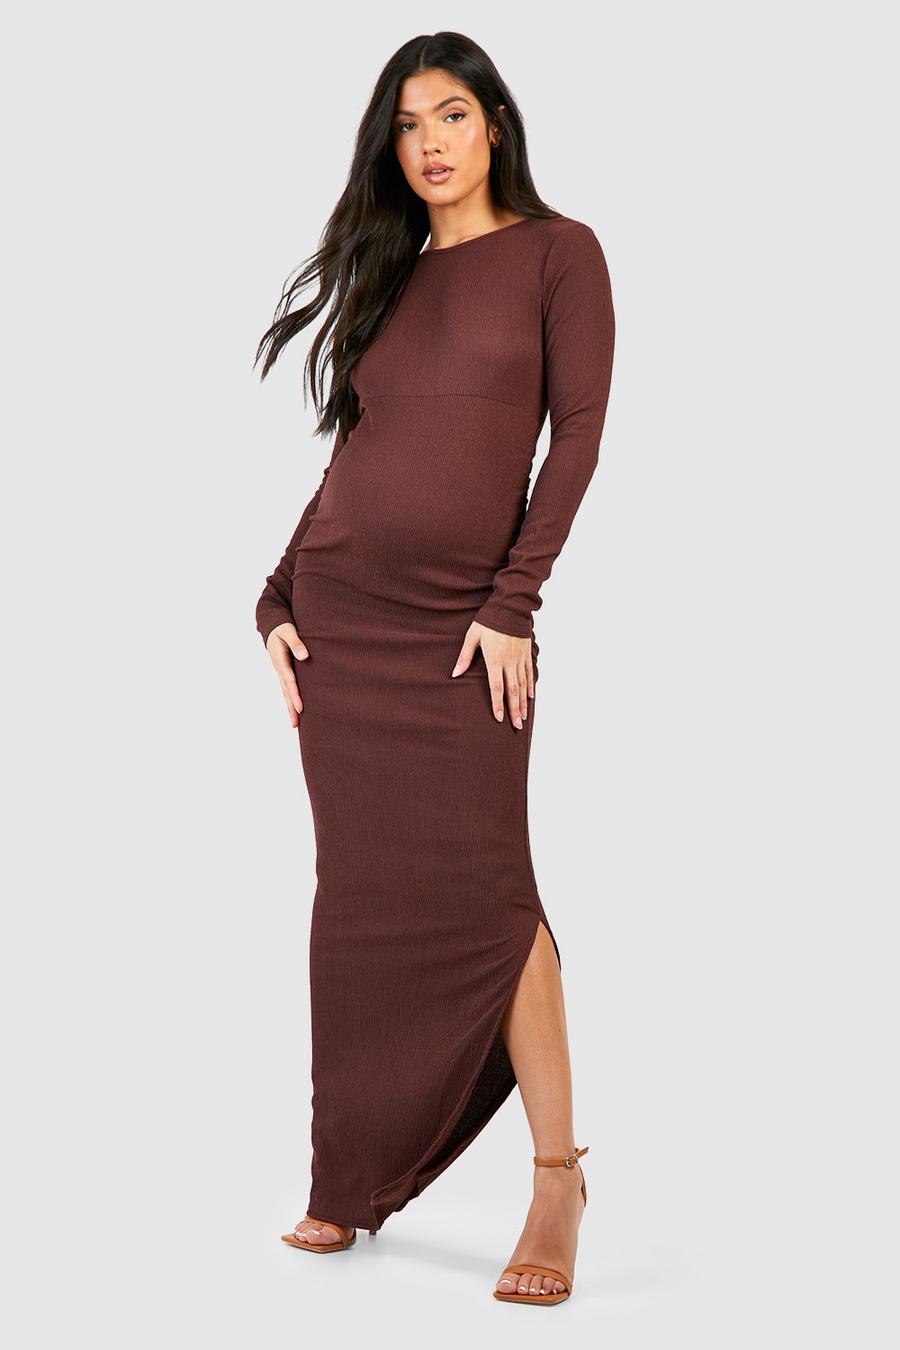 Chocolate brown Maternity Textured Ruched Seam Maxi Dress